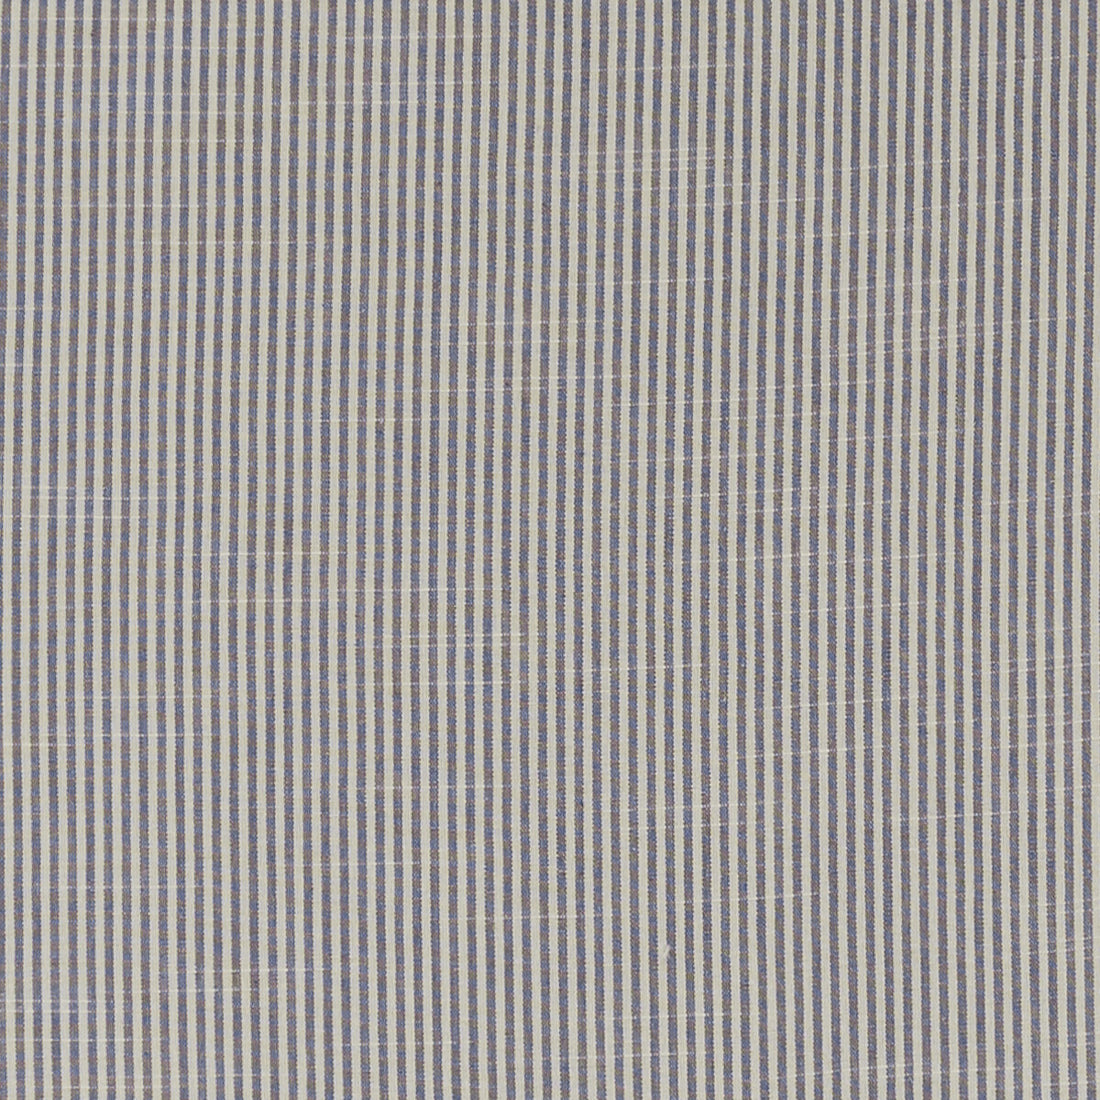 Bempton fabric in denim color - pattern F1307/03.CAC.0 - by Clarke And Clarke in the Bempton By Studio G For C&amp;C collection